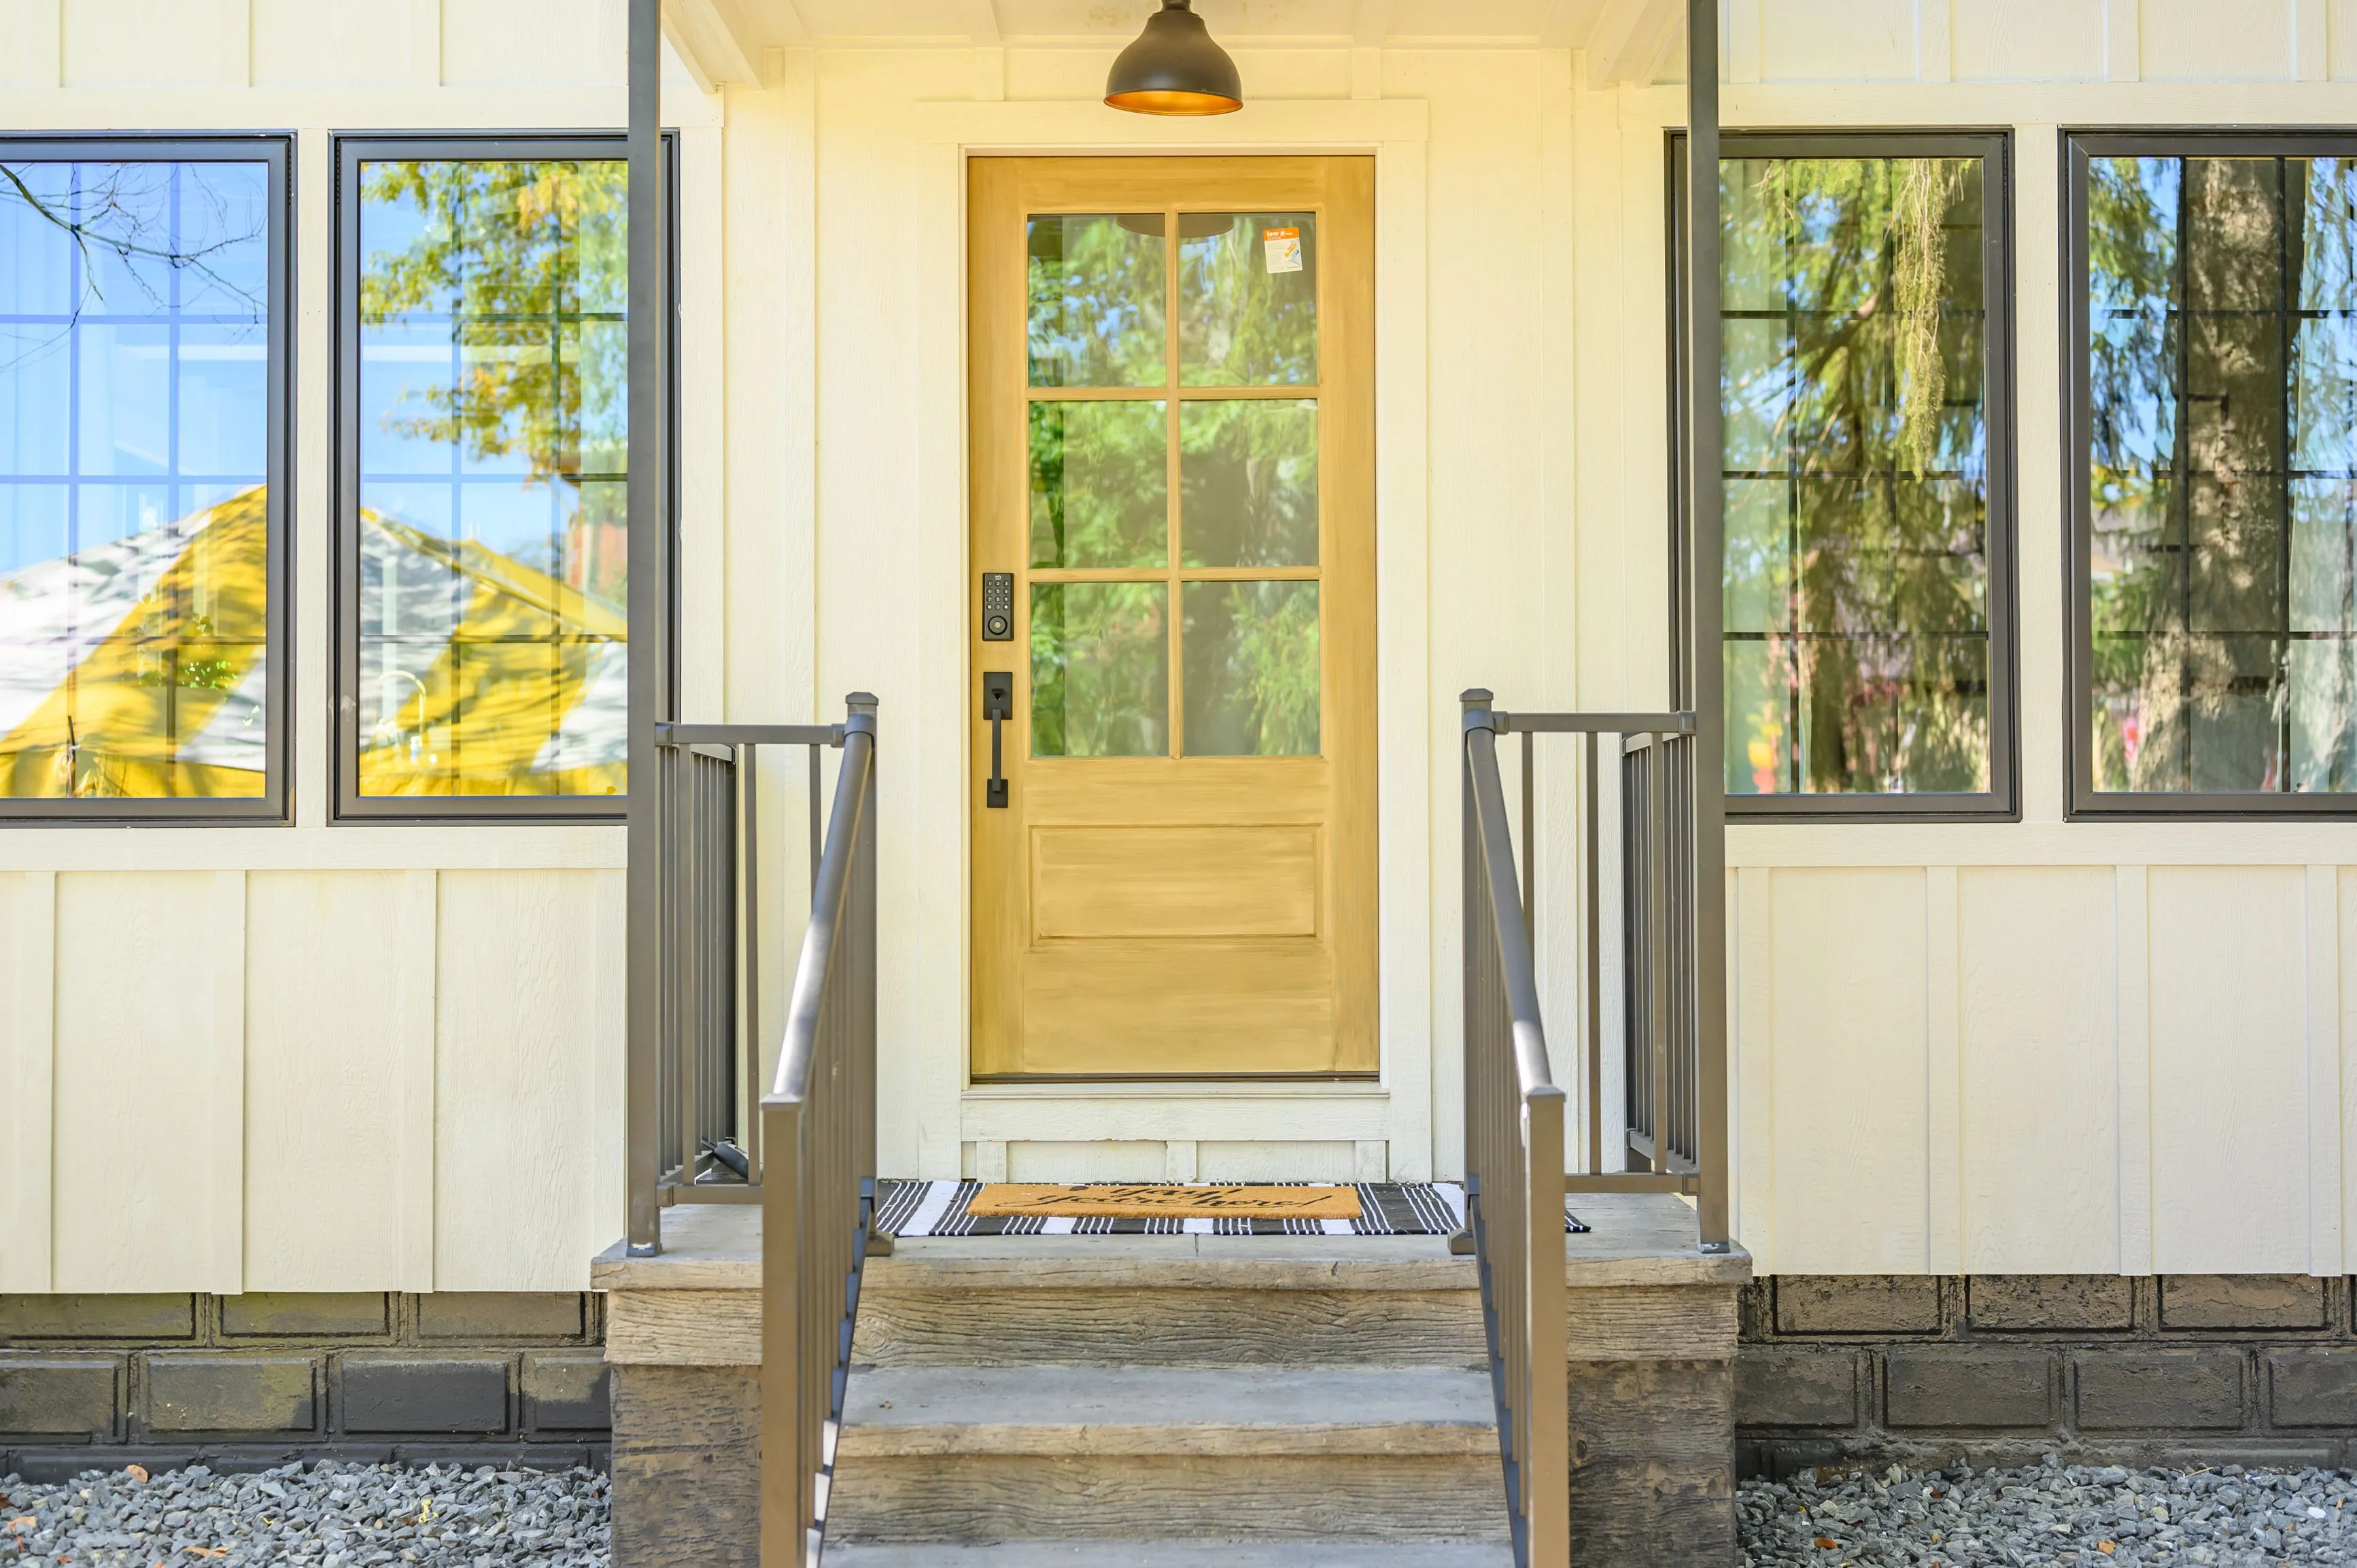 Front entrance of a modern house with a wooden door, glass side panels, and metal handrails on the steps.